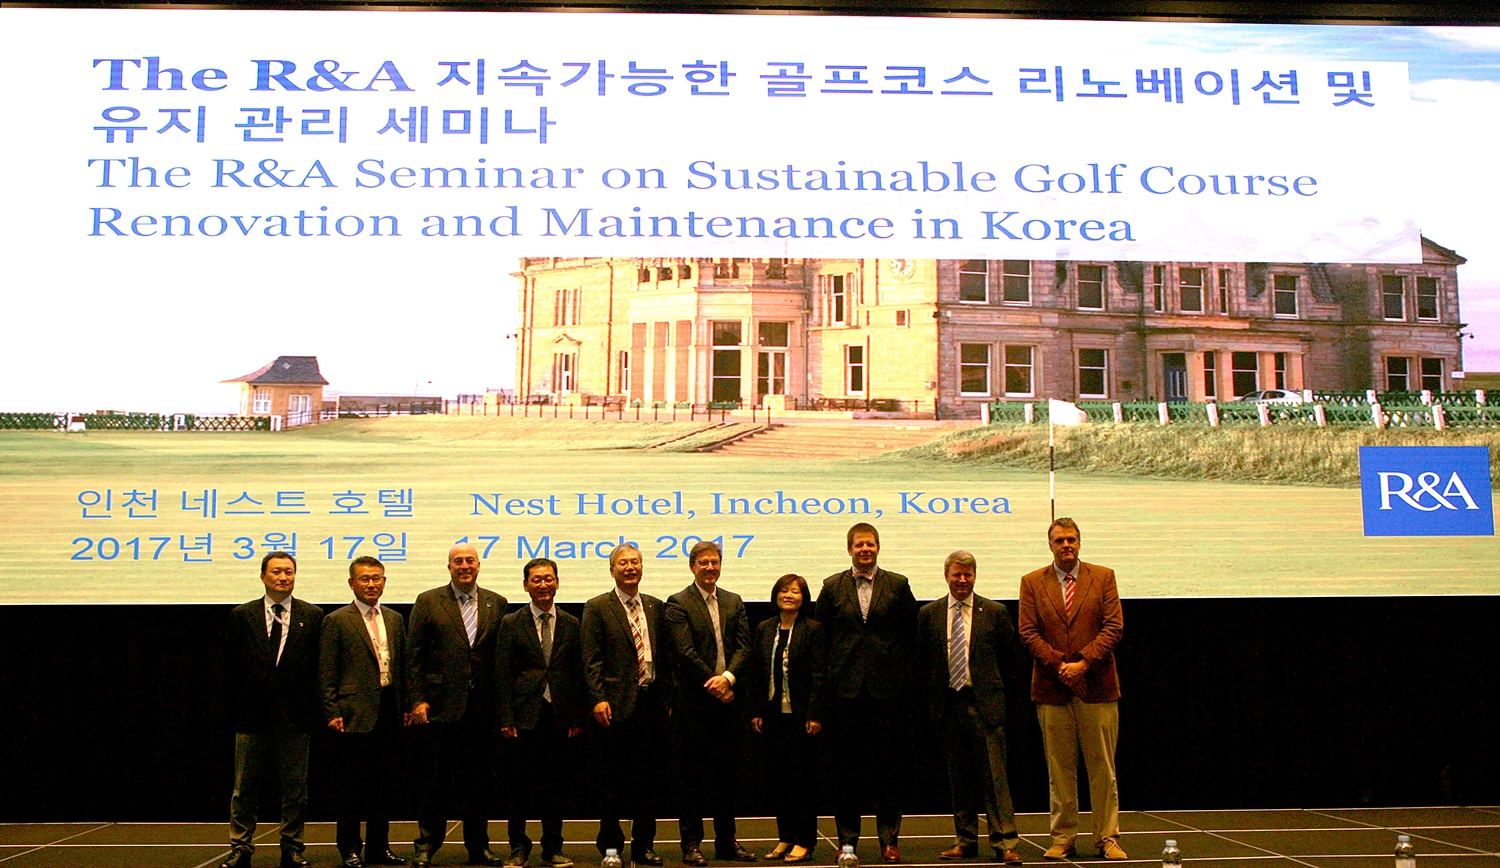 Expert panel members presented at The R&A’s Sustainability in Golf seminars